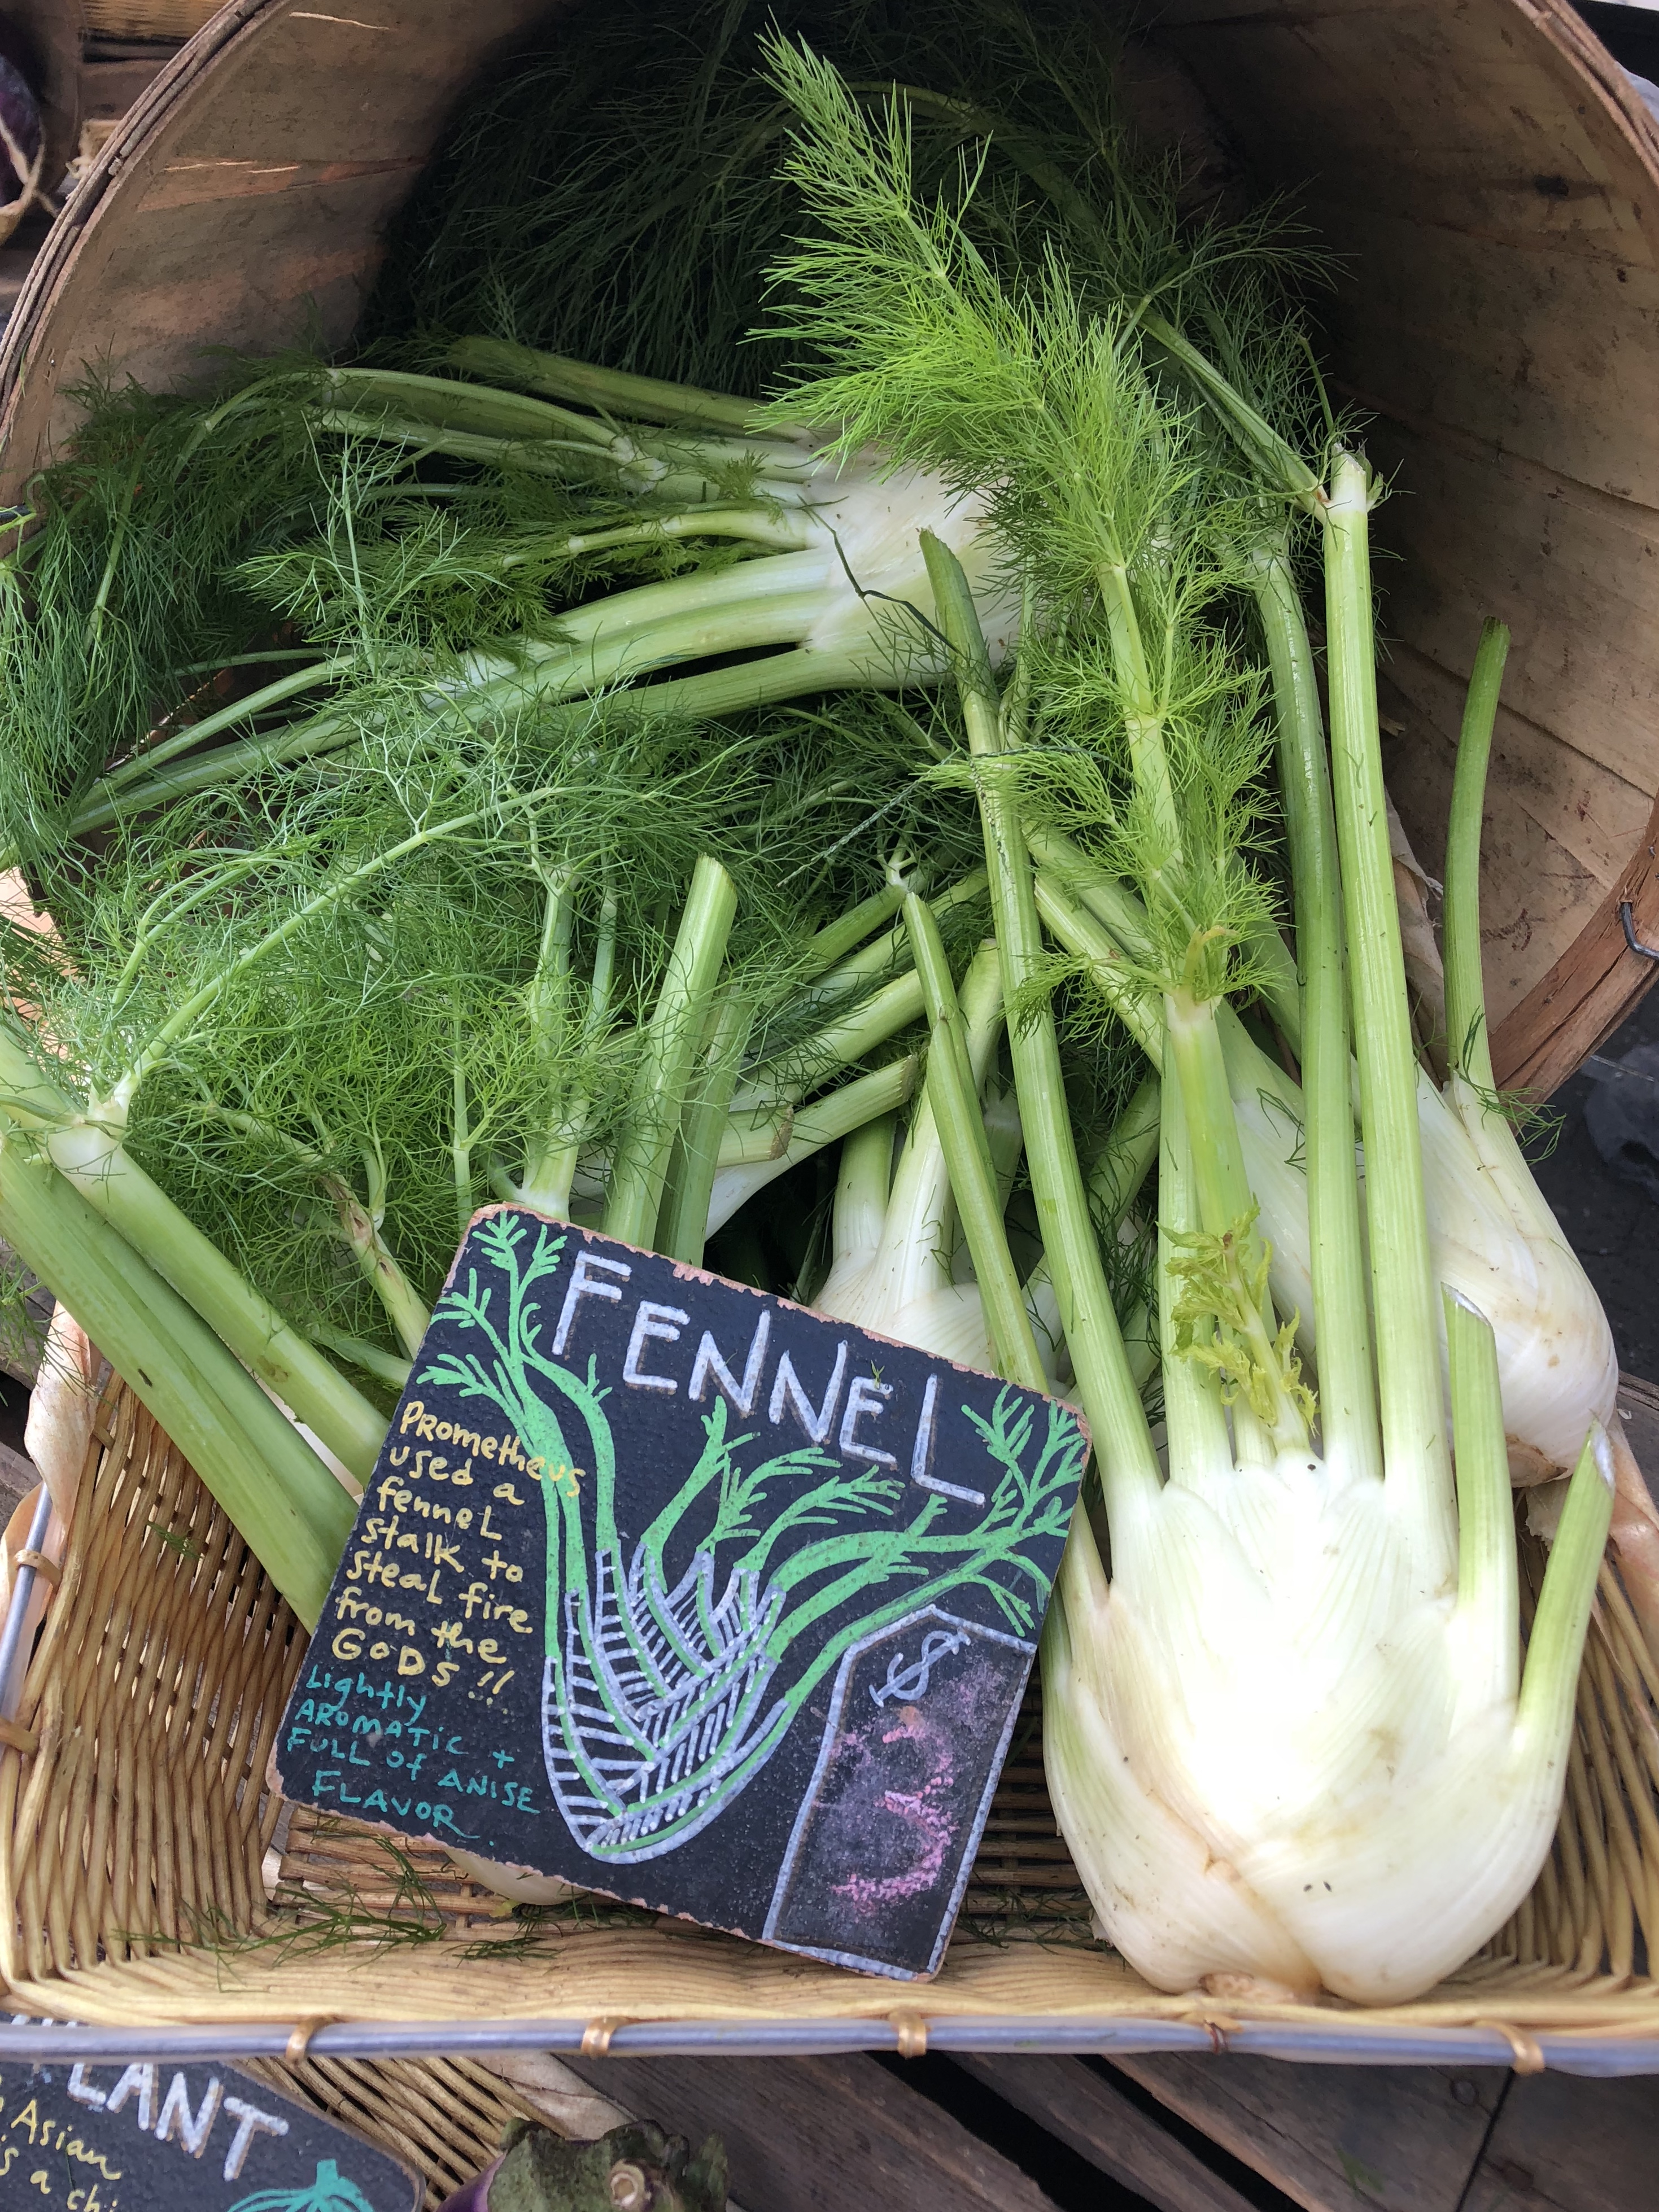 Find fennel at the farmers market.